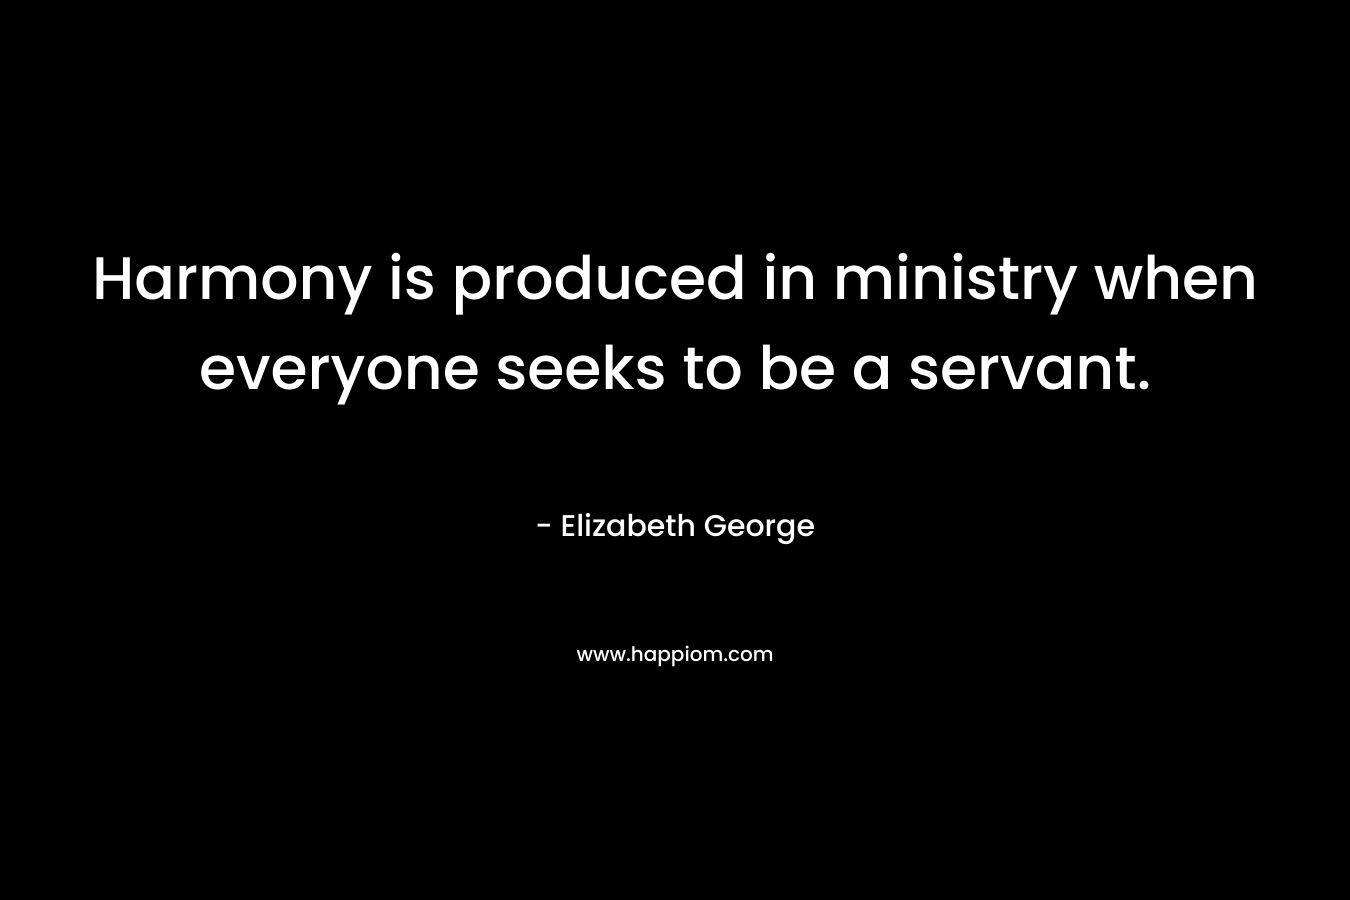 Harmony is produced in ministry when everyone seeks to be a servant.